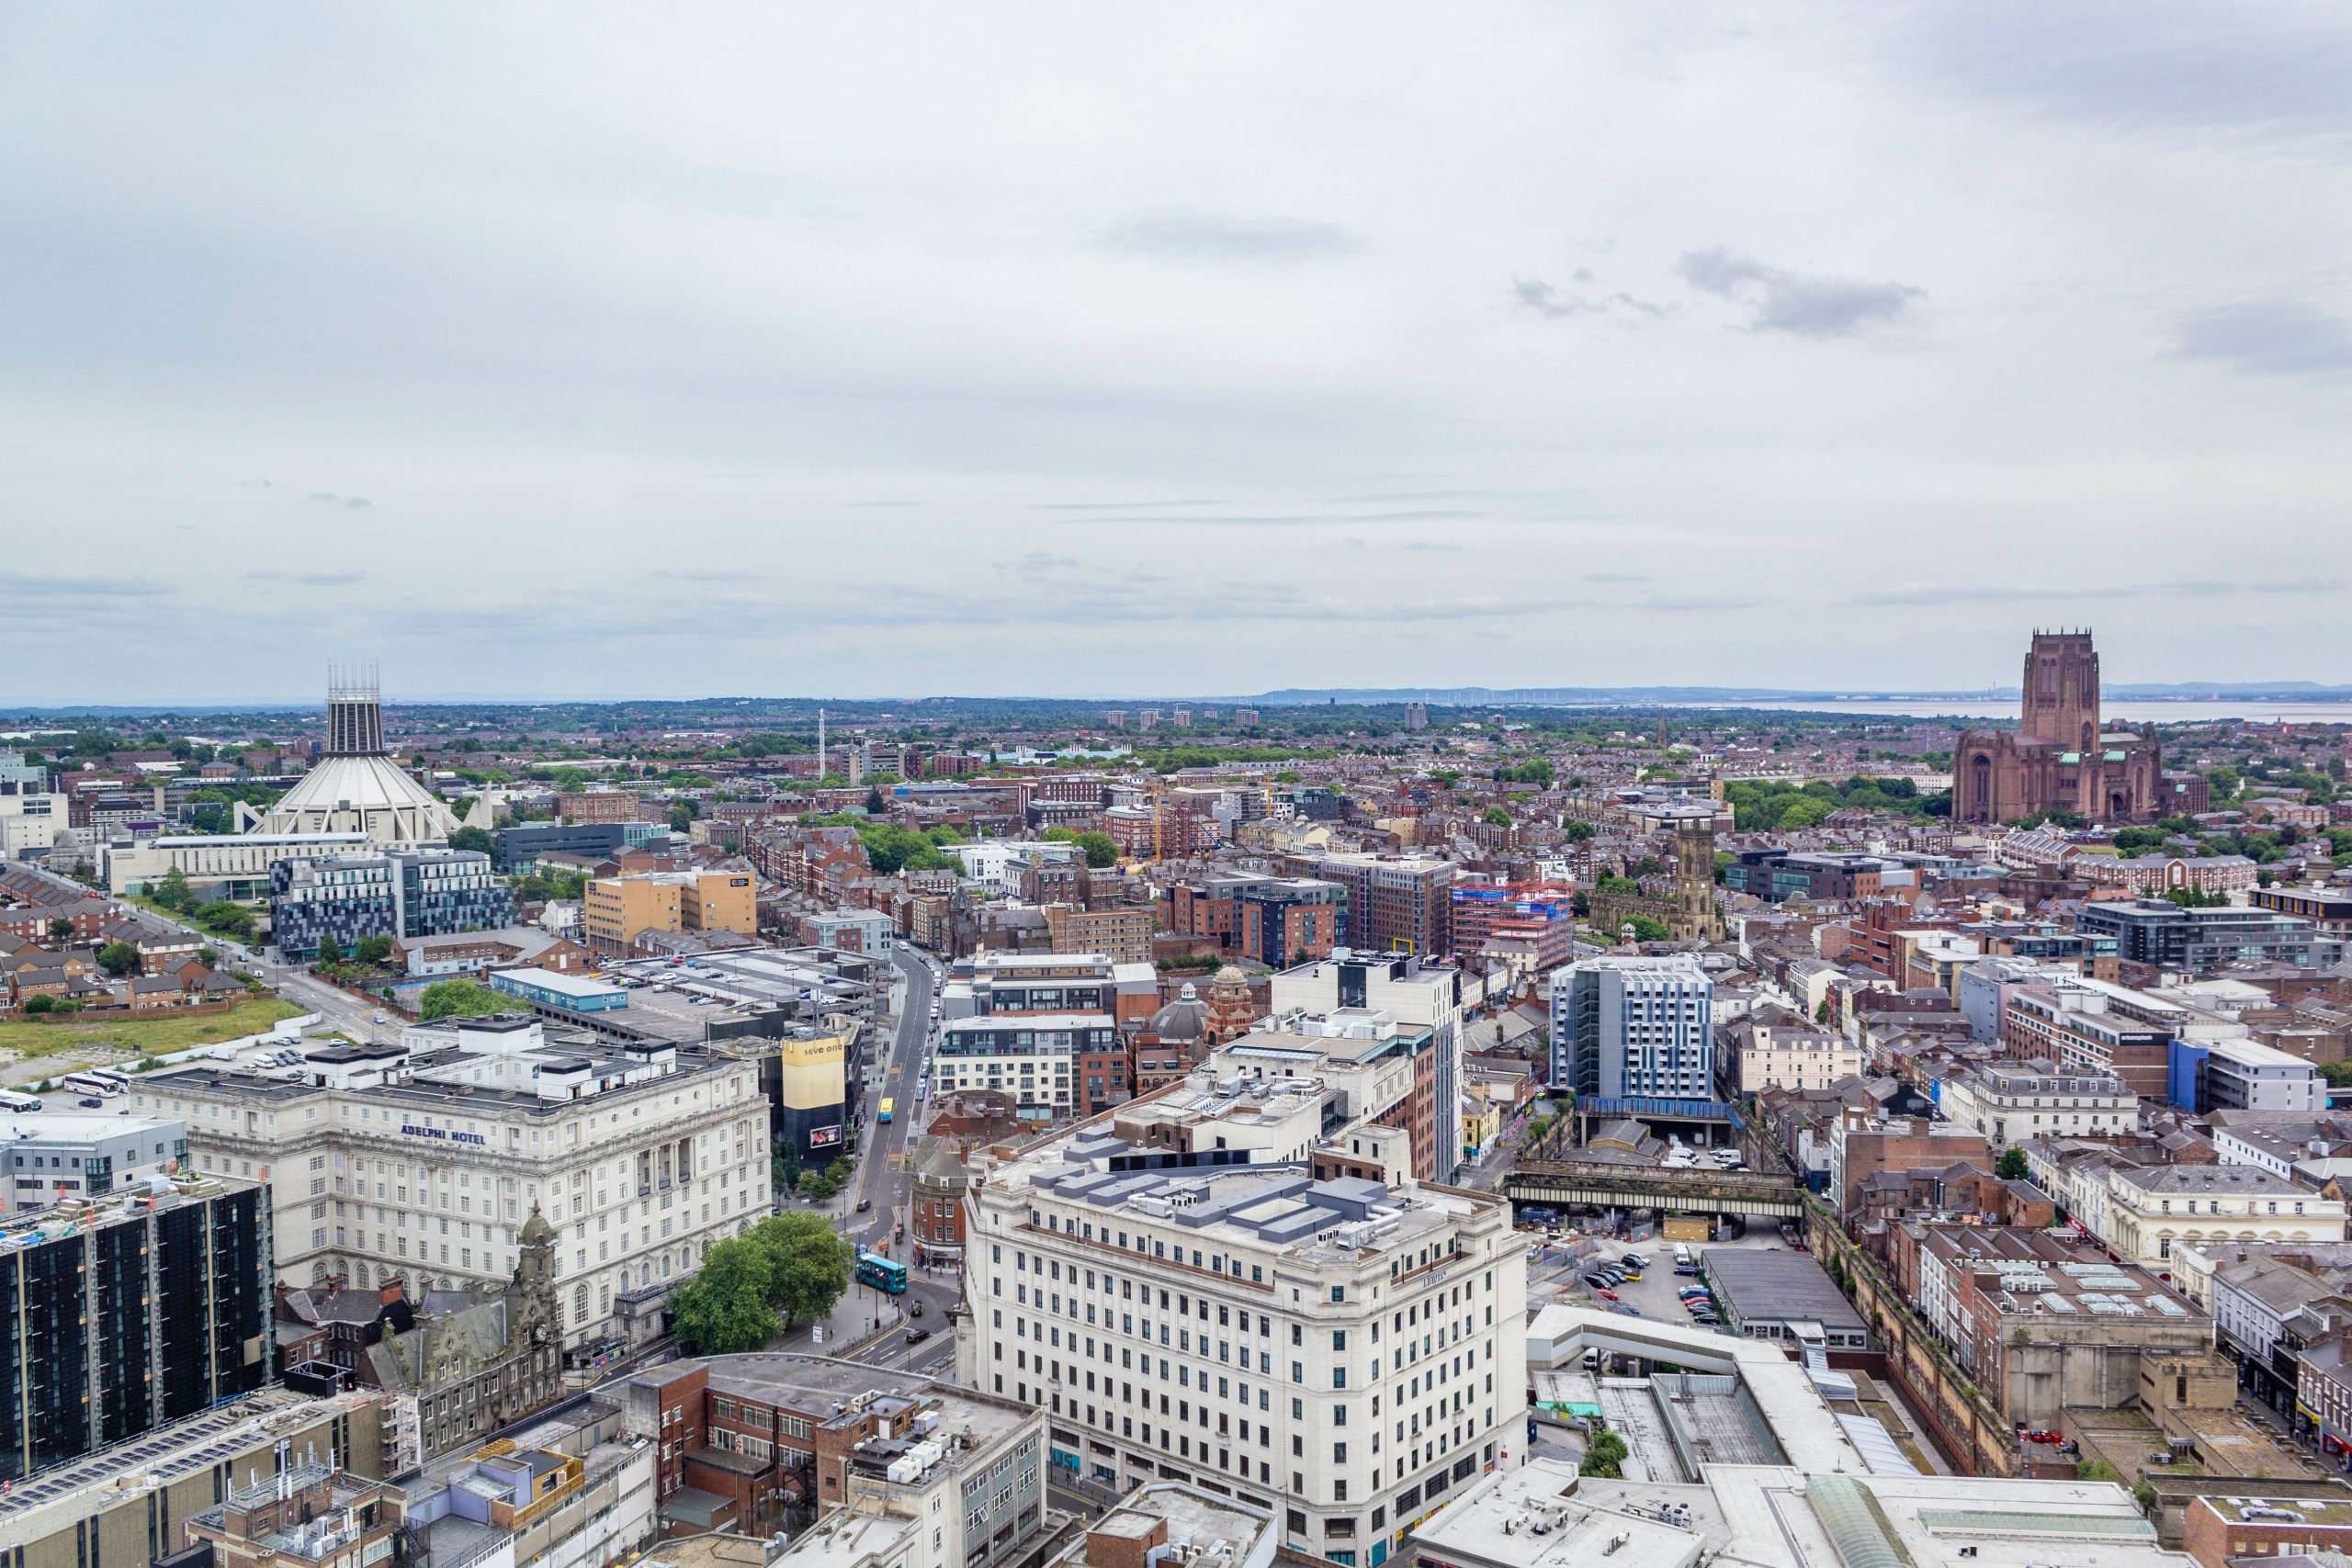 Liverpool City Centre as seen from above